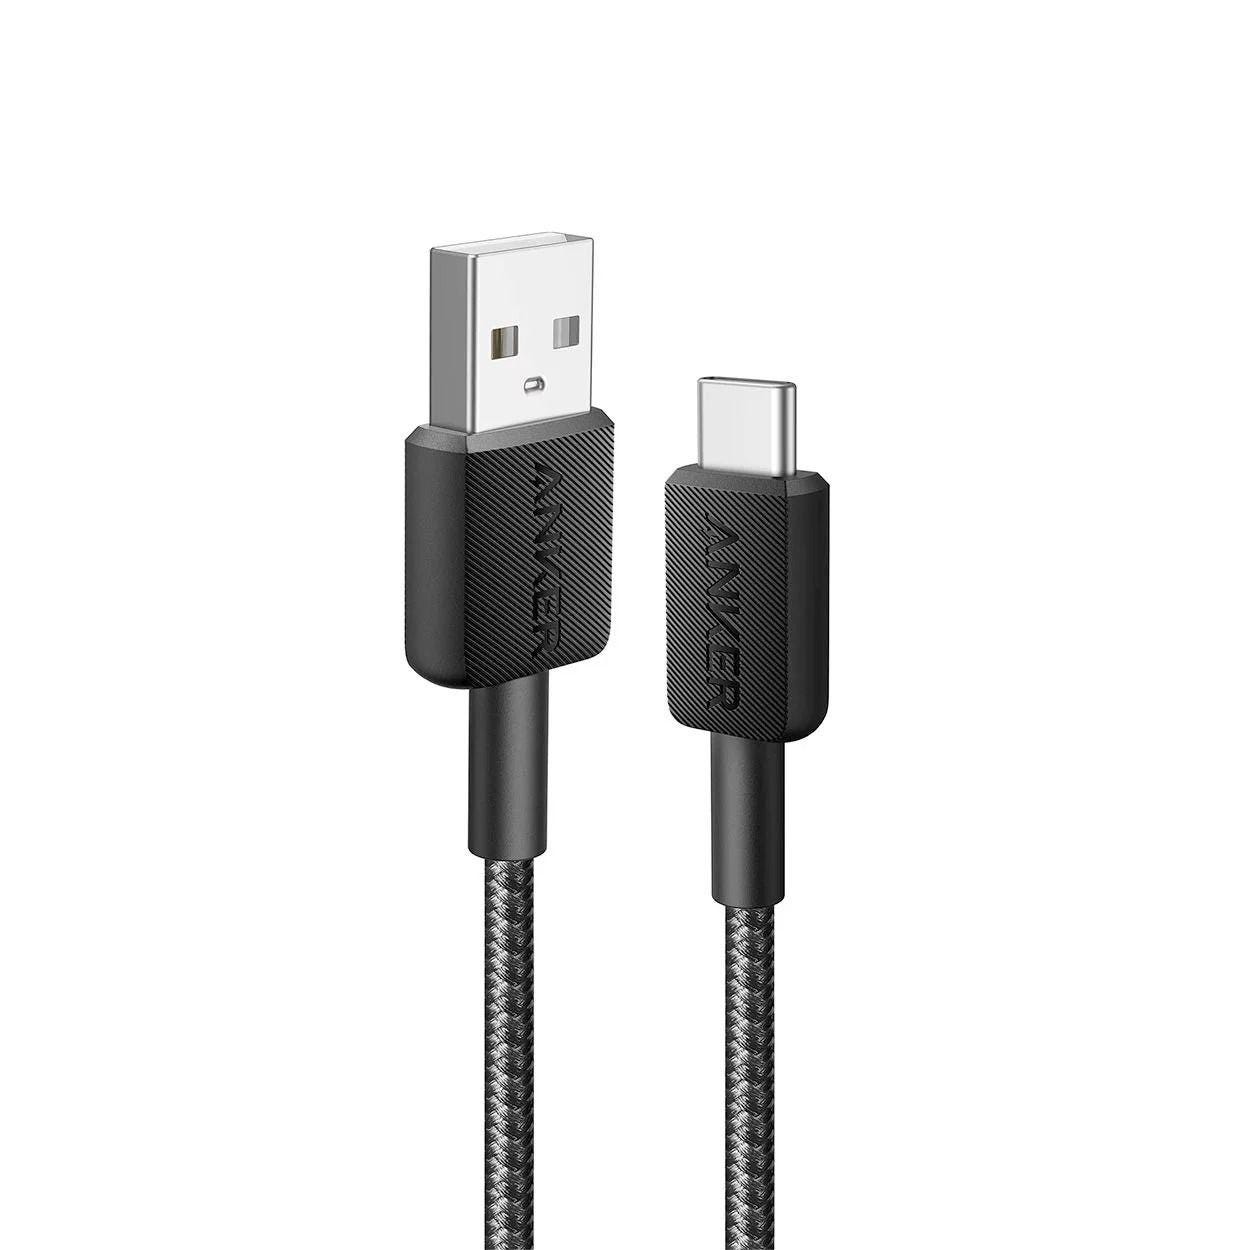 Anker 322 USB-A to USB-C Cable -3ft Braided- Black